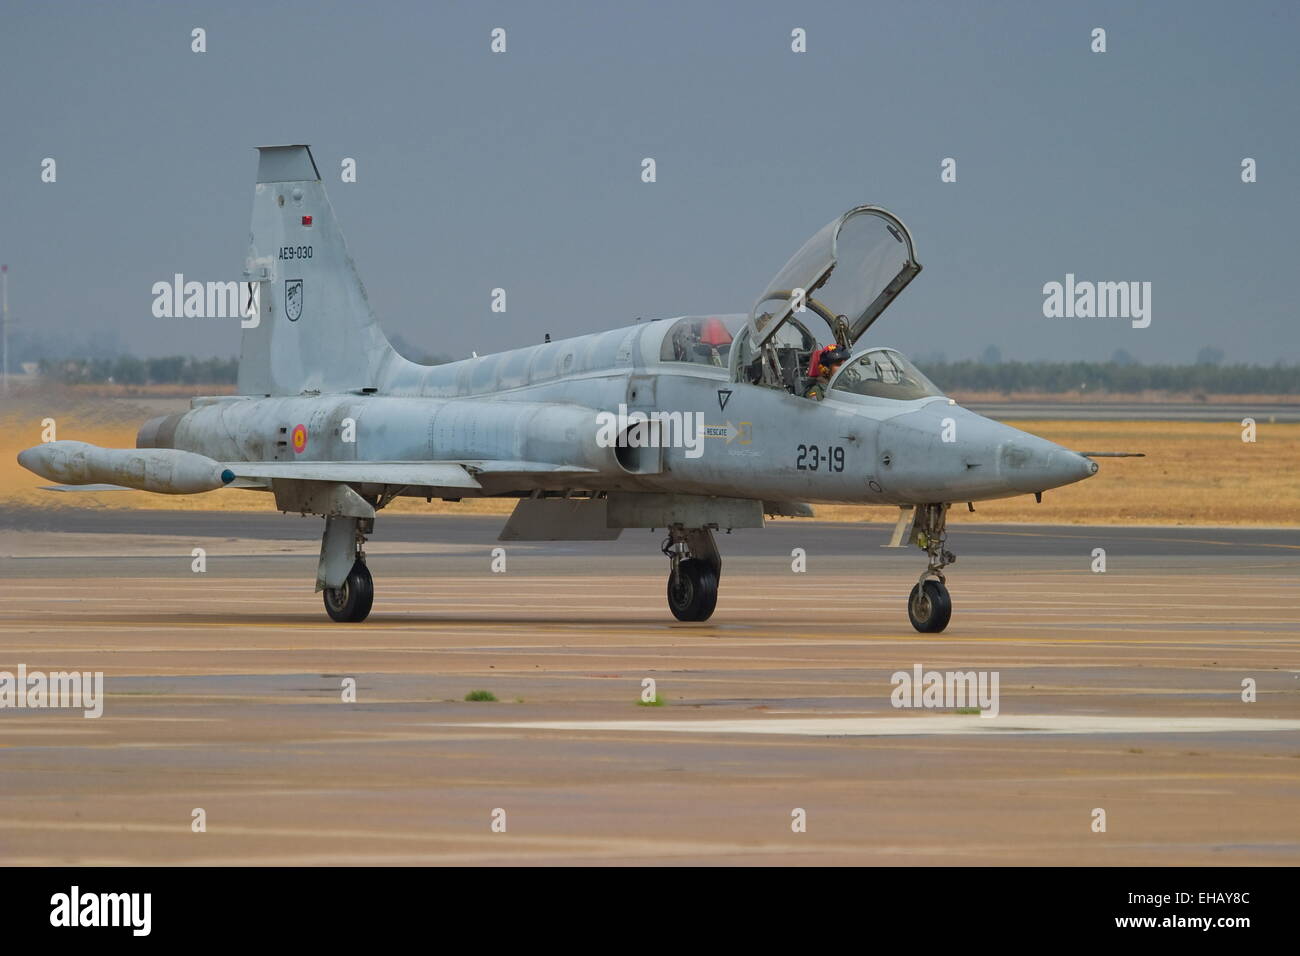 Military aircraft assigned to the combat and other warlike functions Stock Photo